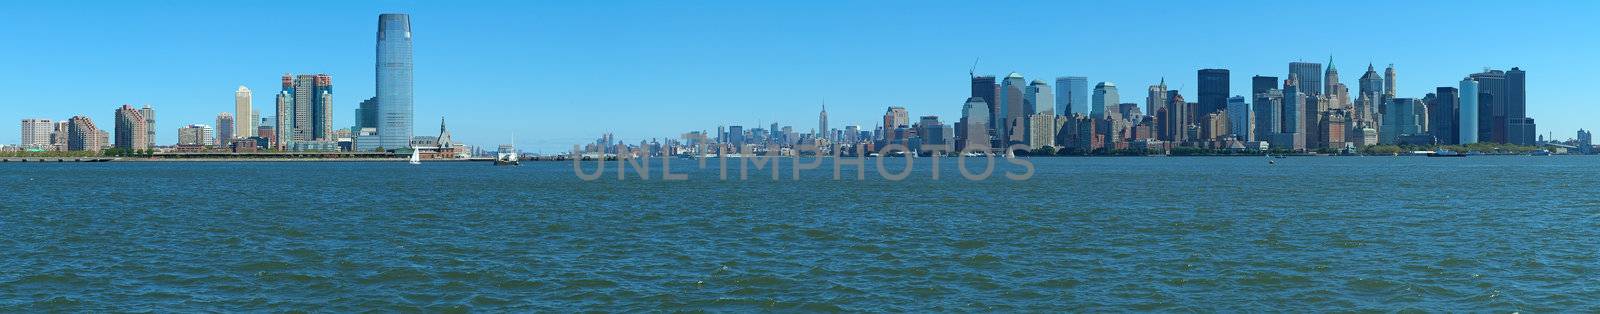 new york and jersey panorama by rorem